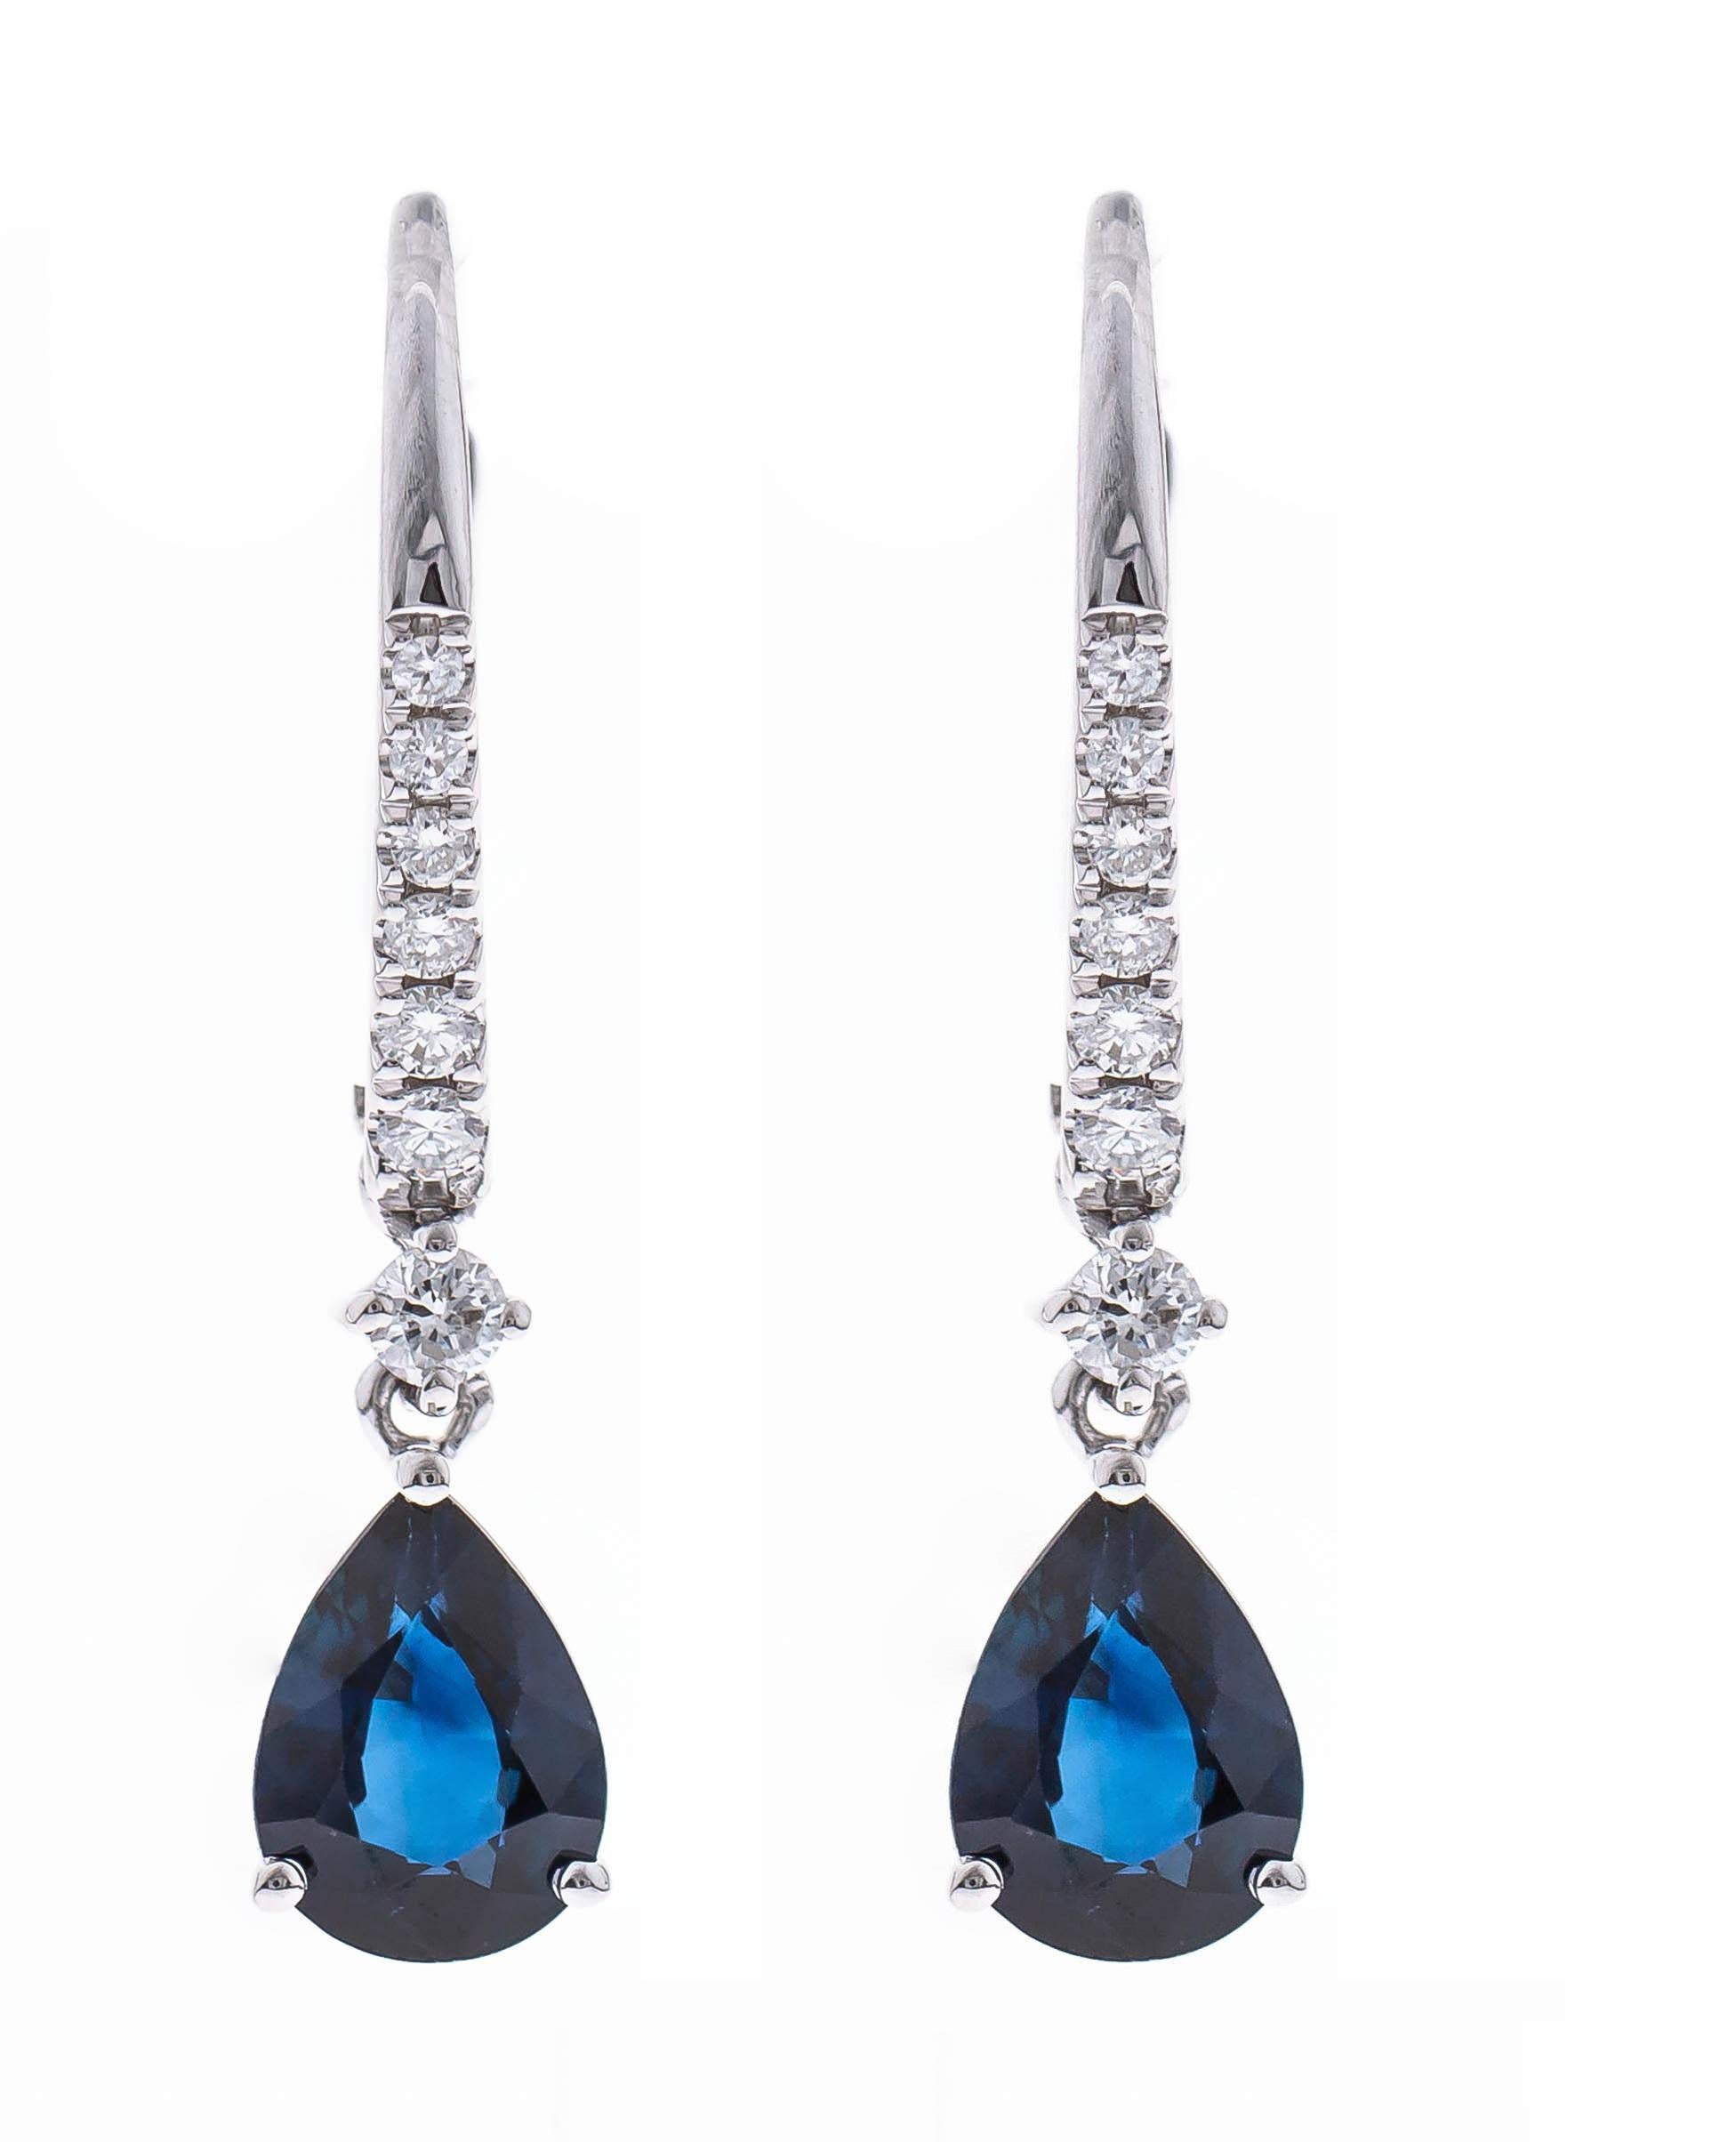 Pear Cut 1.49 carat Pear-cut Blue Sapphire With Diamond accents 14K White Gold Earring. For Sale